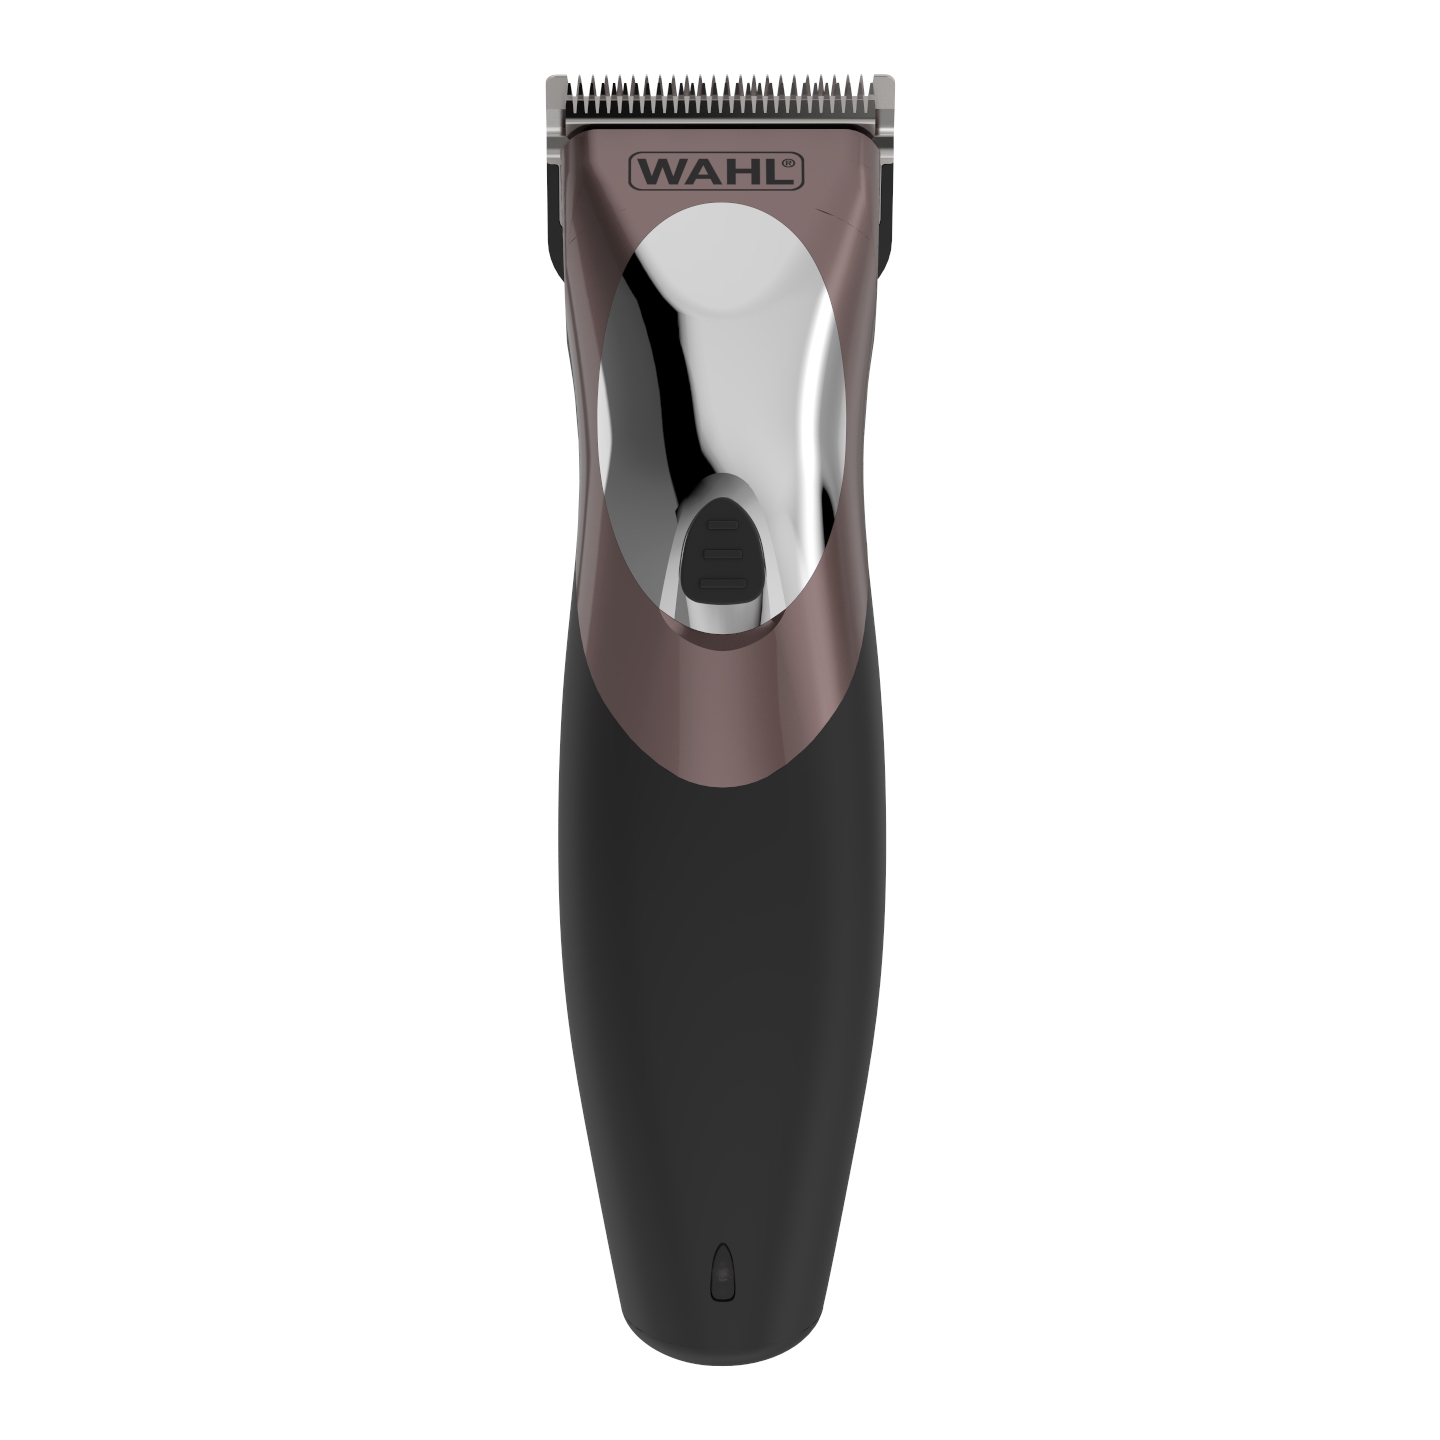 wahl clip and rinse hair clippers